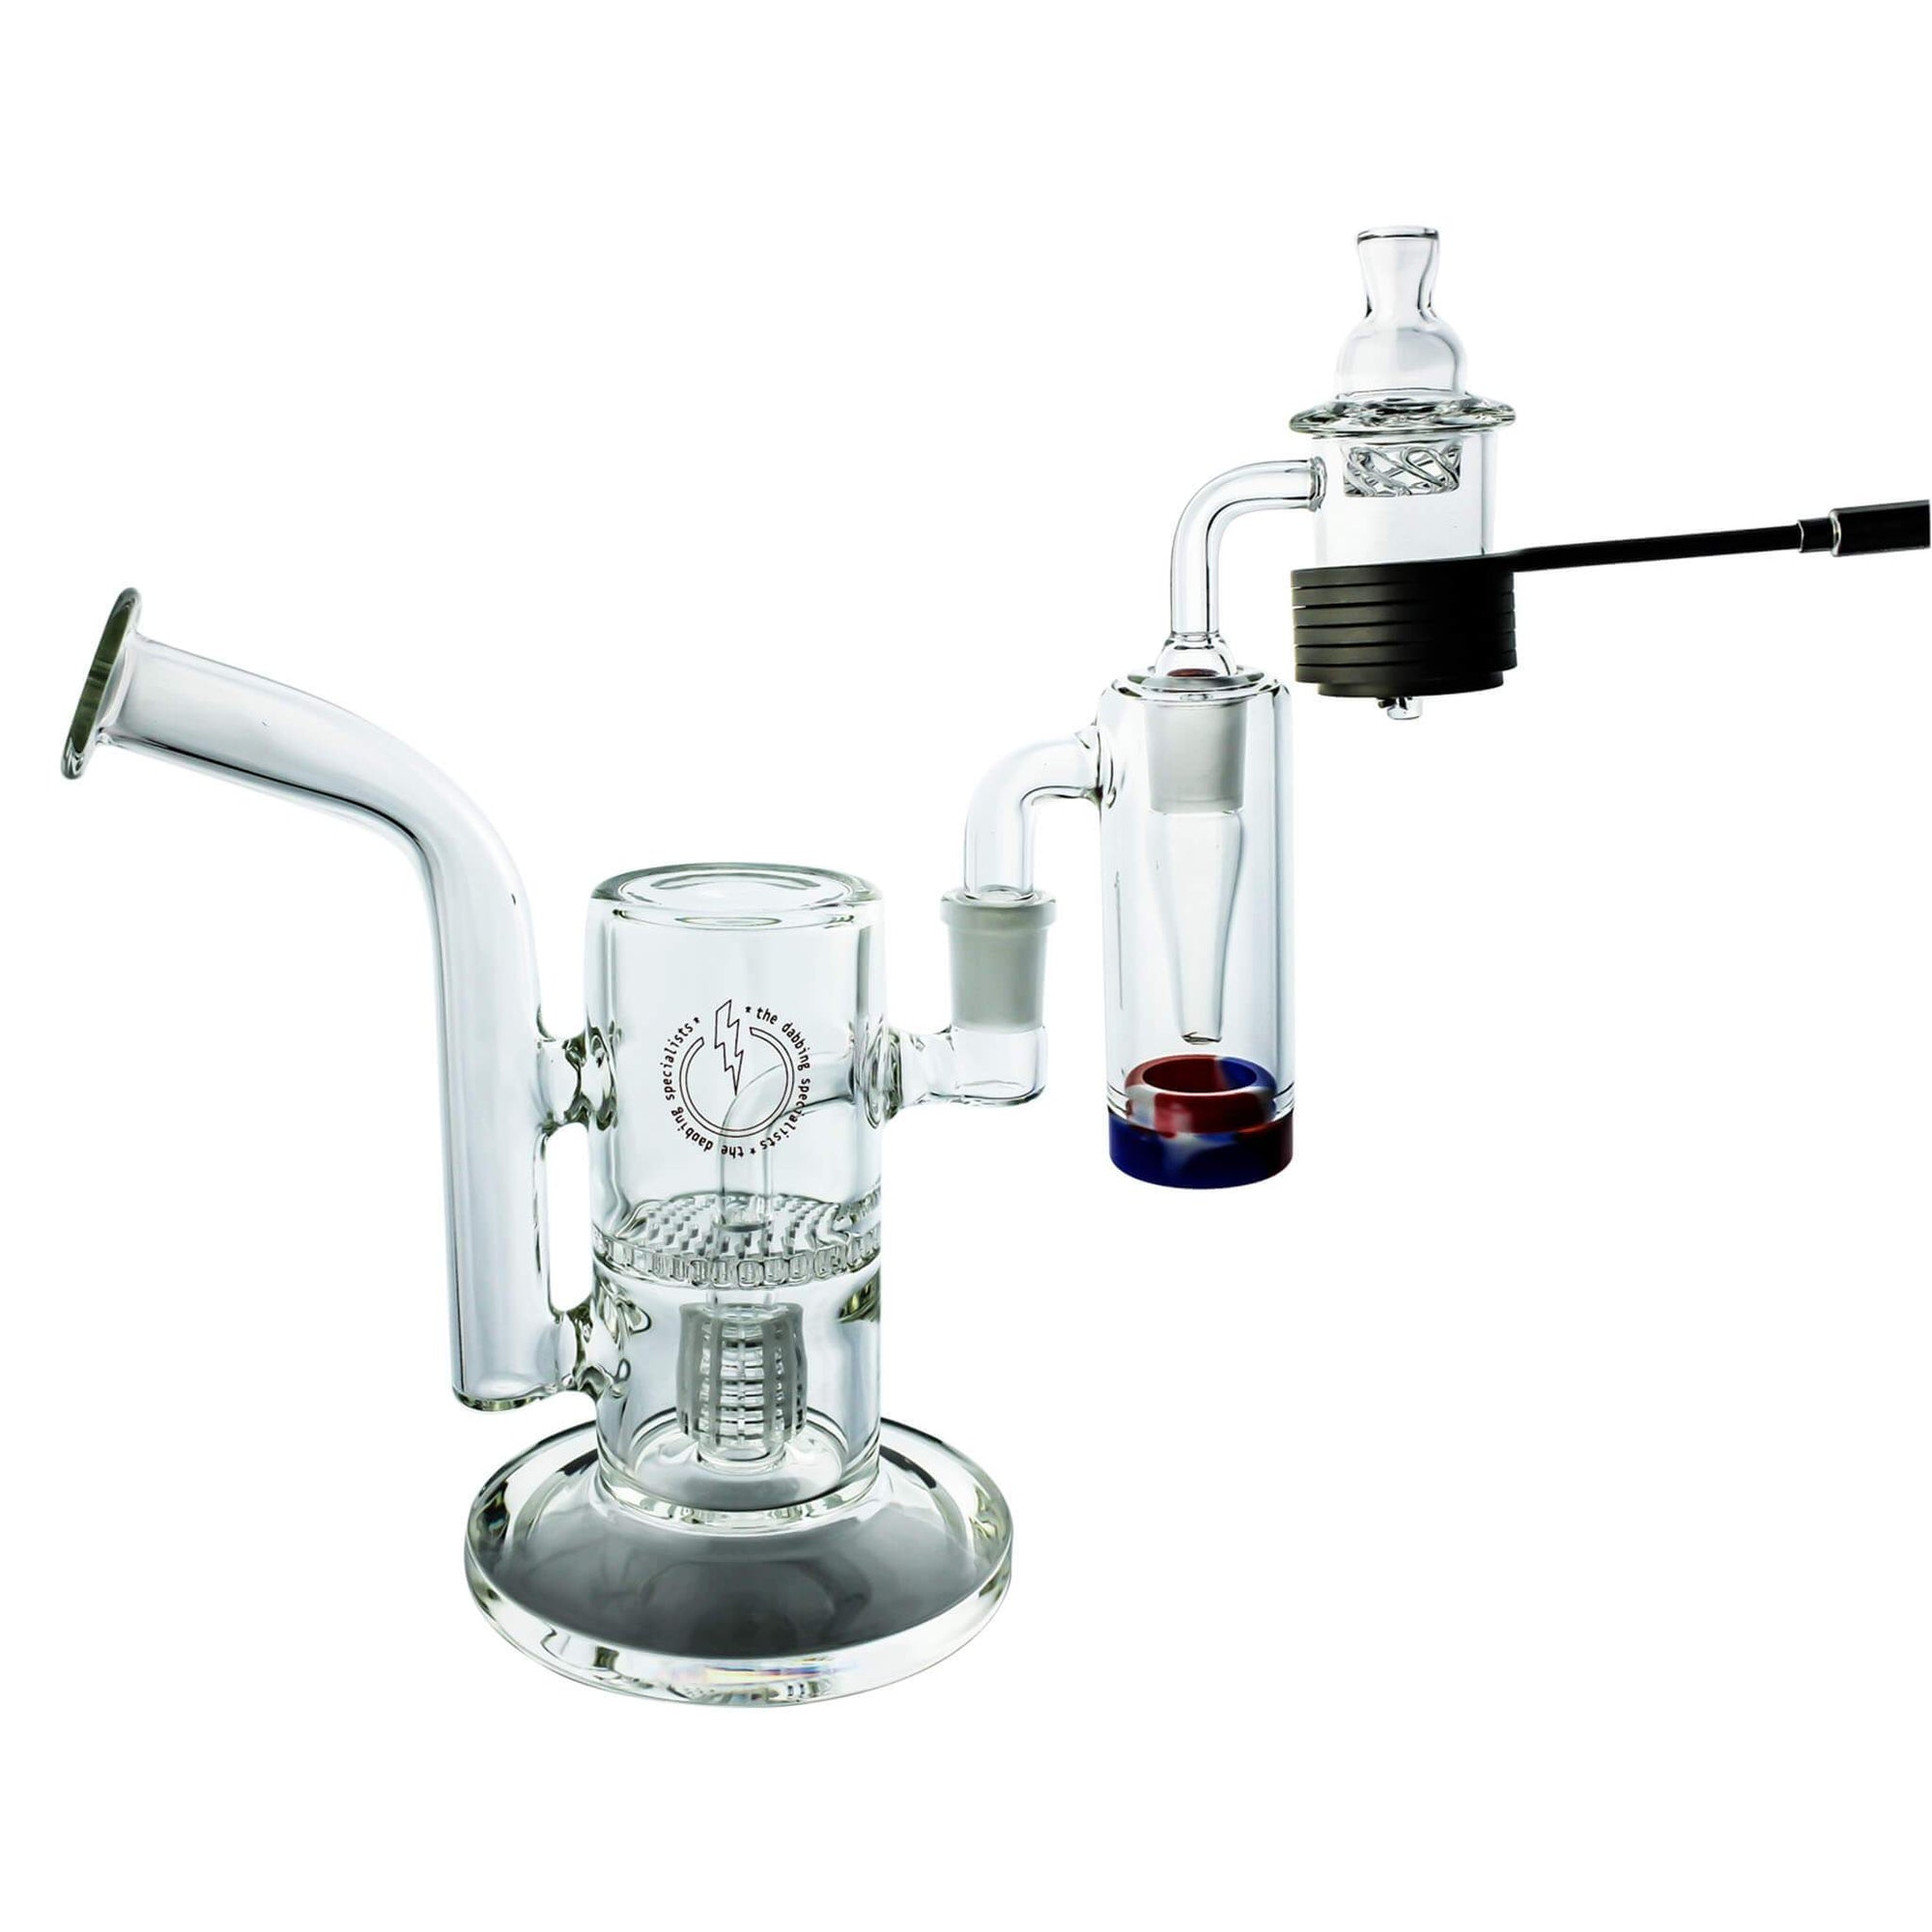 30mm Mini Enail Complete Dabbing Kit #5 | Full Rig View | the dabbing specialists